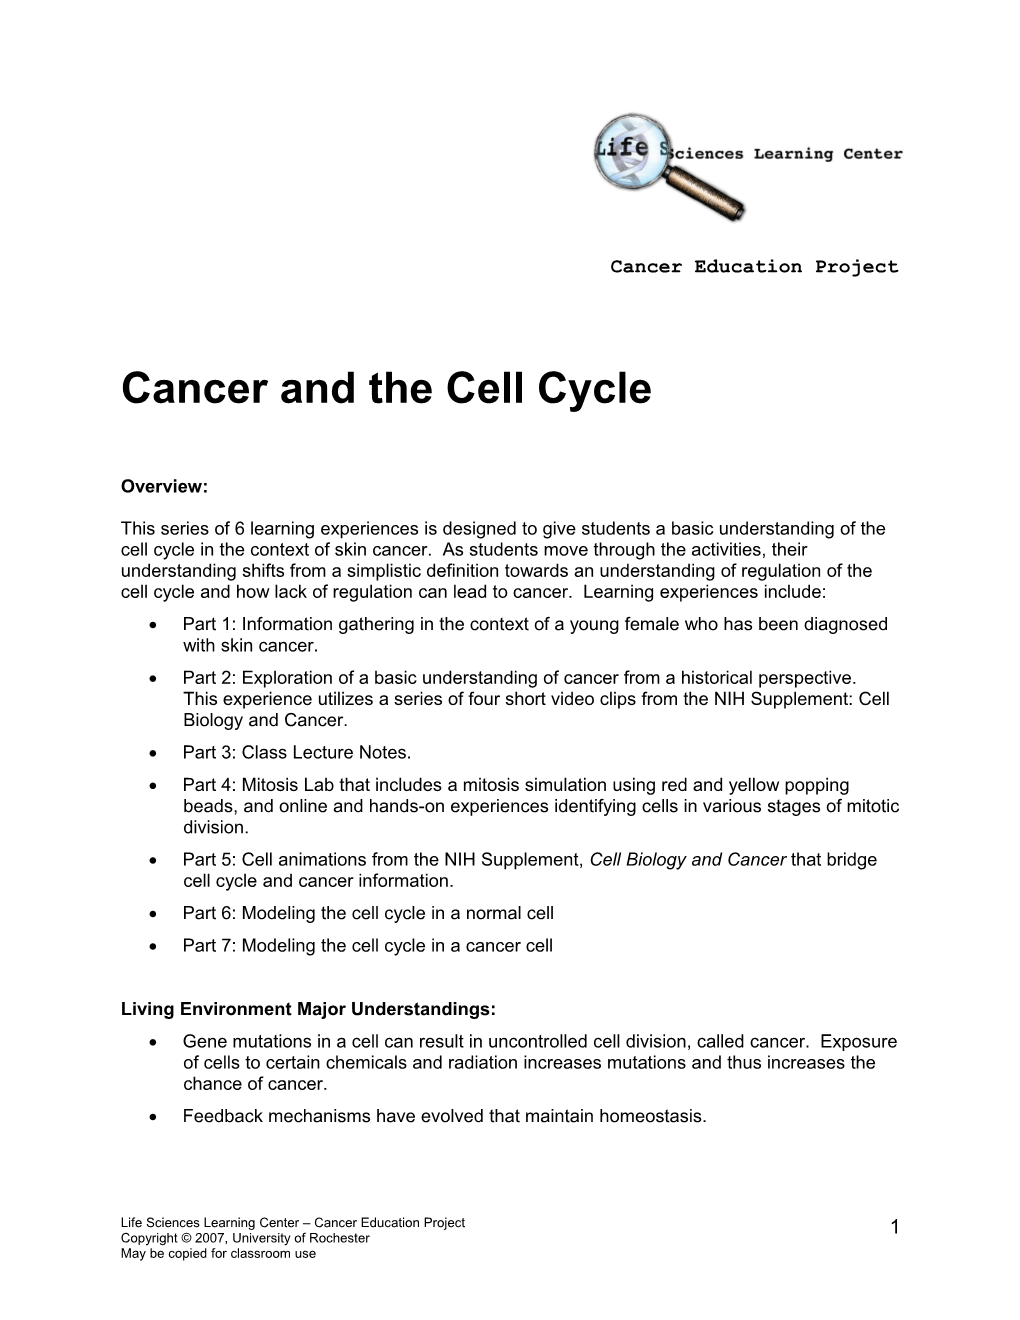 Cancer and the Cell Cycle (Teacher Notes)